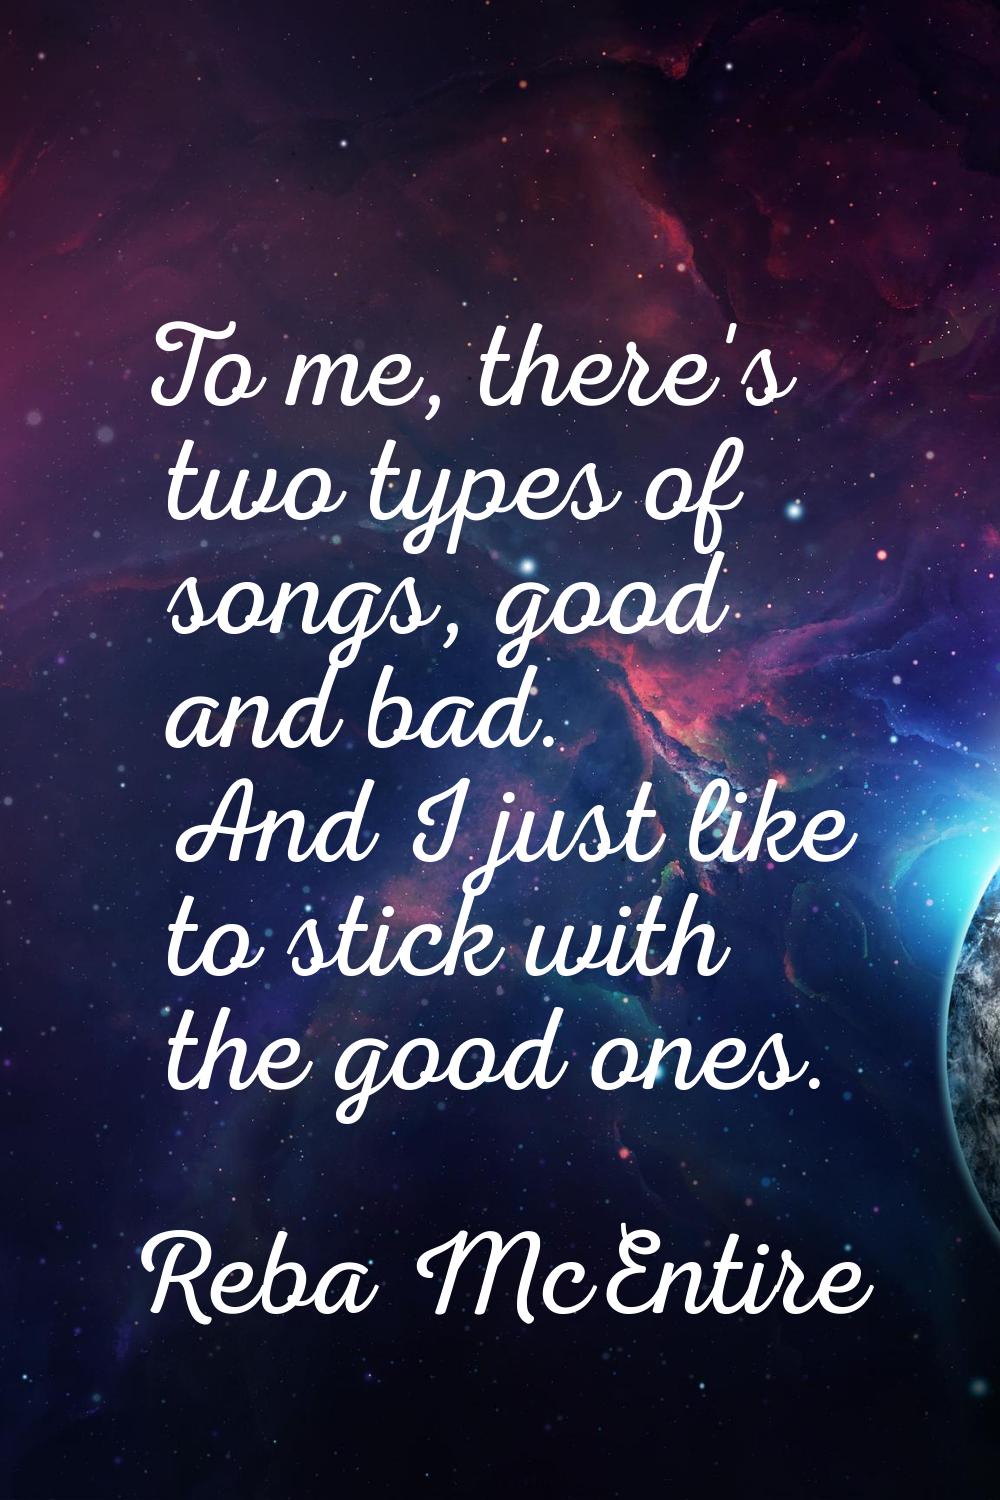 To me, there's two types of songs, good and bad. And I just like to stick with the good ones.